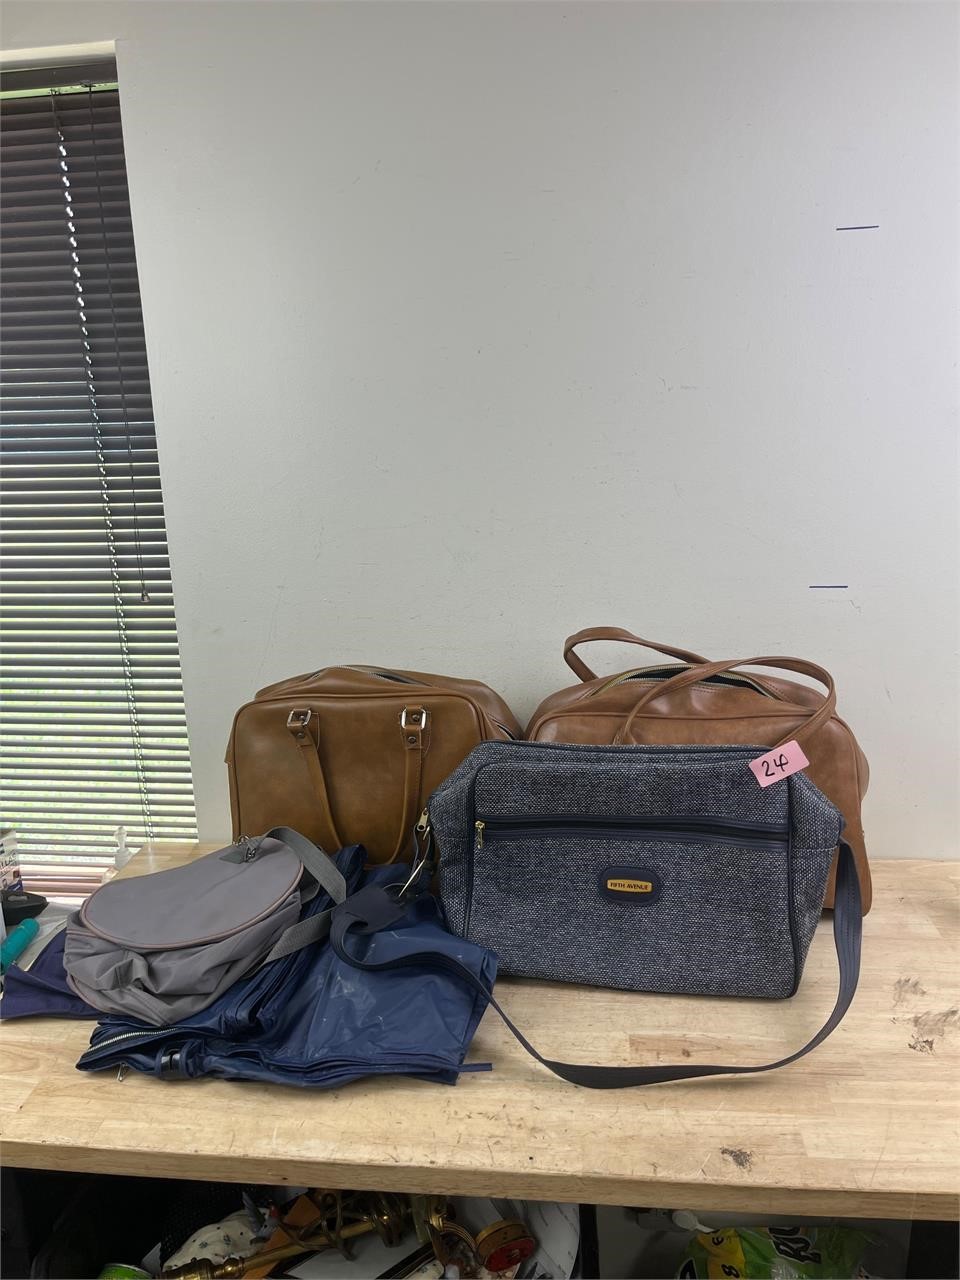 Lot of bags/luggage